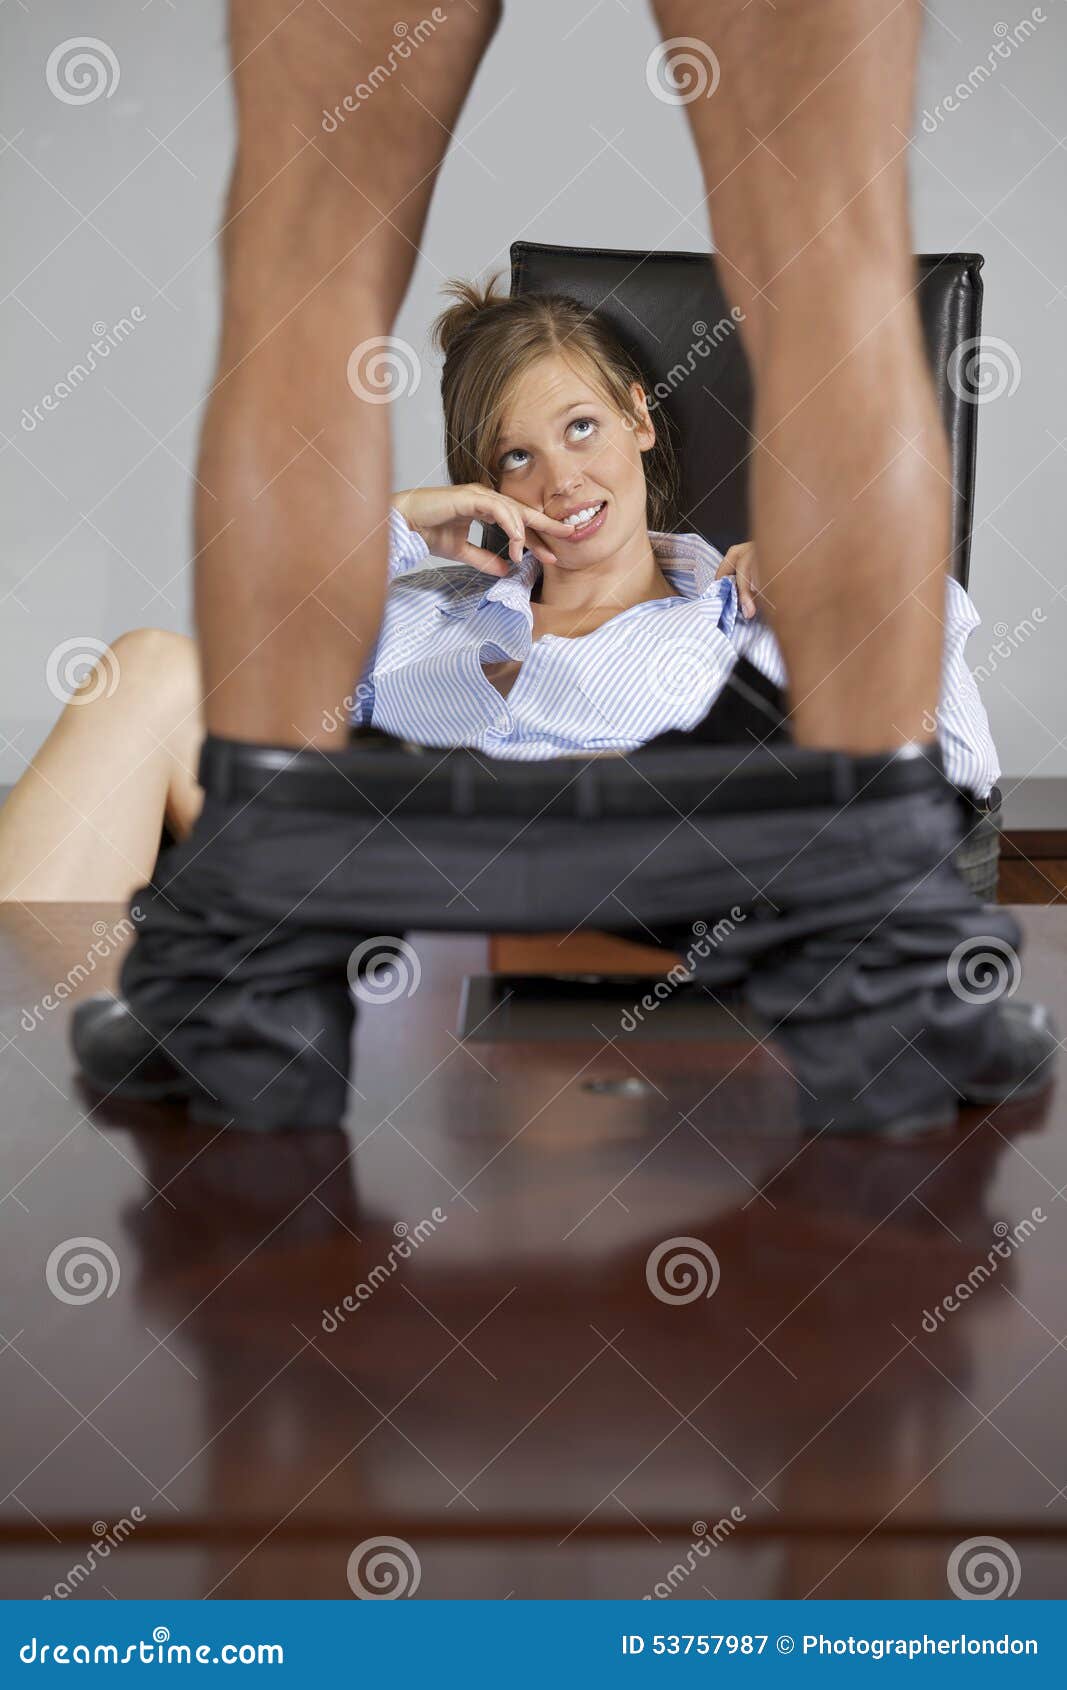 man standing on table with trouser down, flirting with businesswoman in office